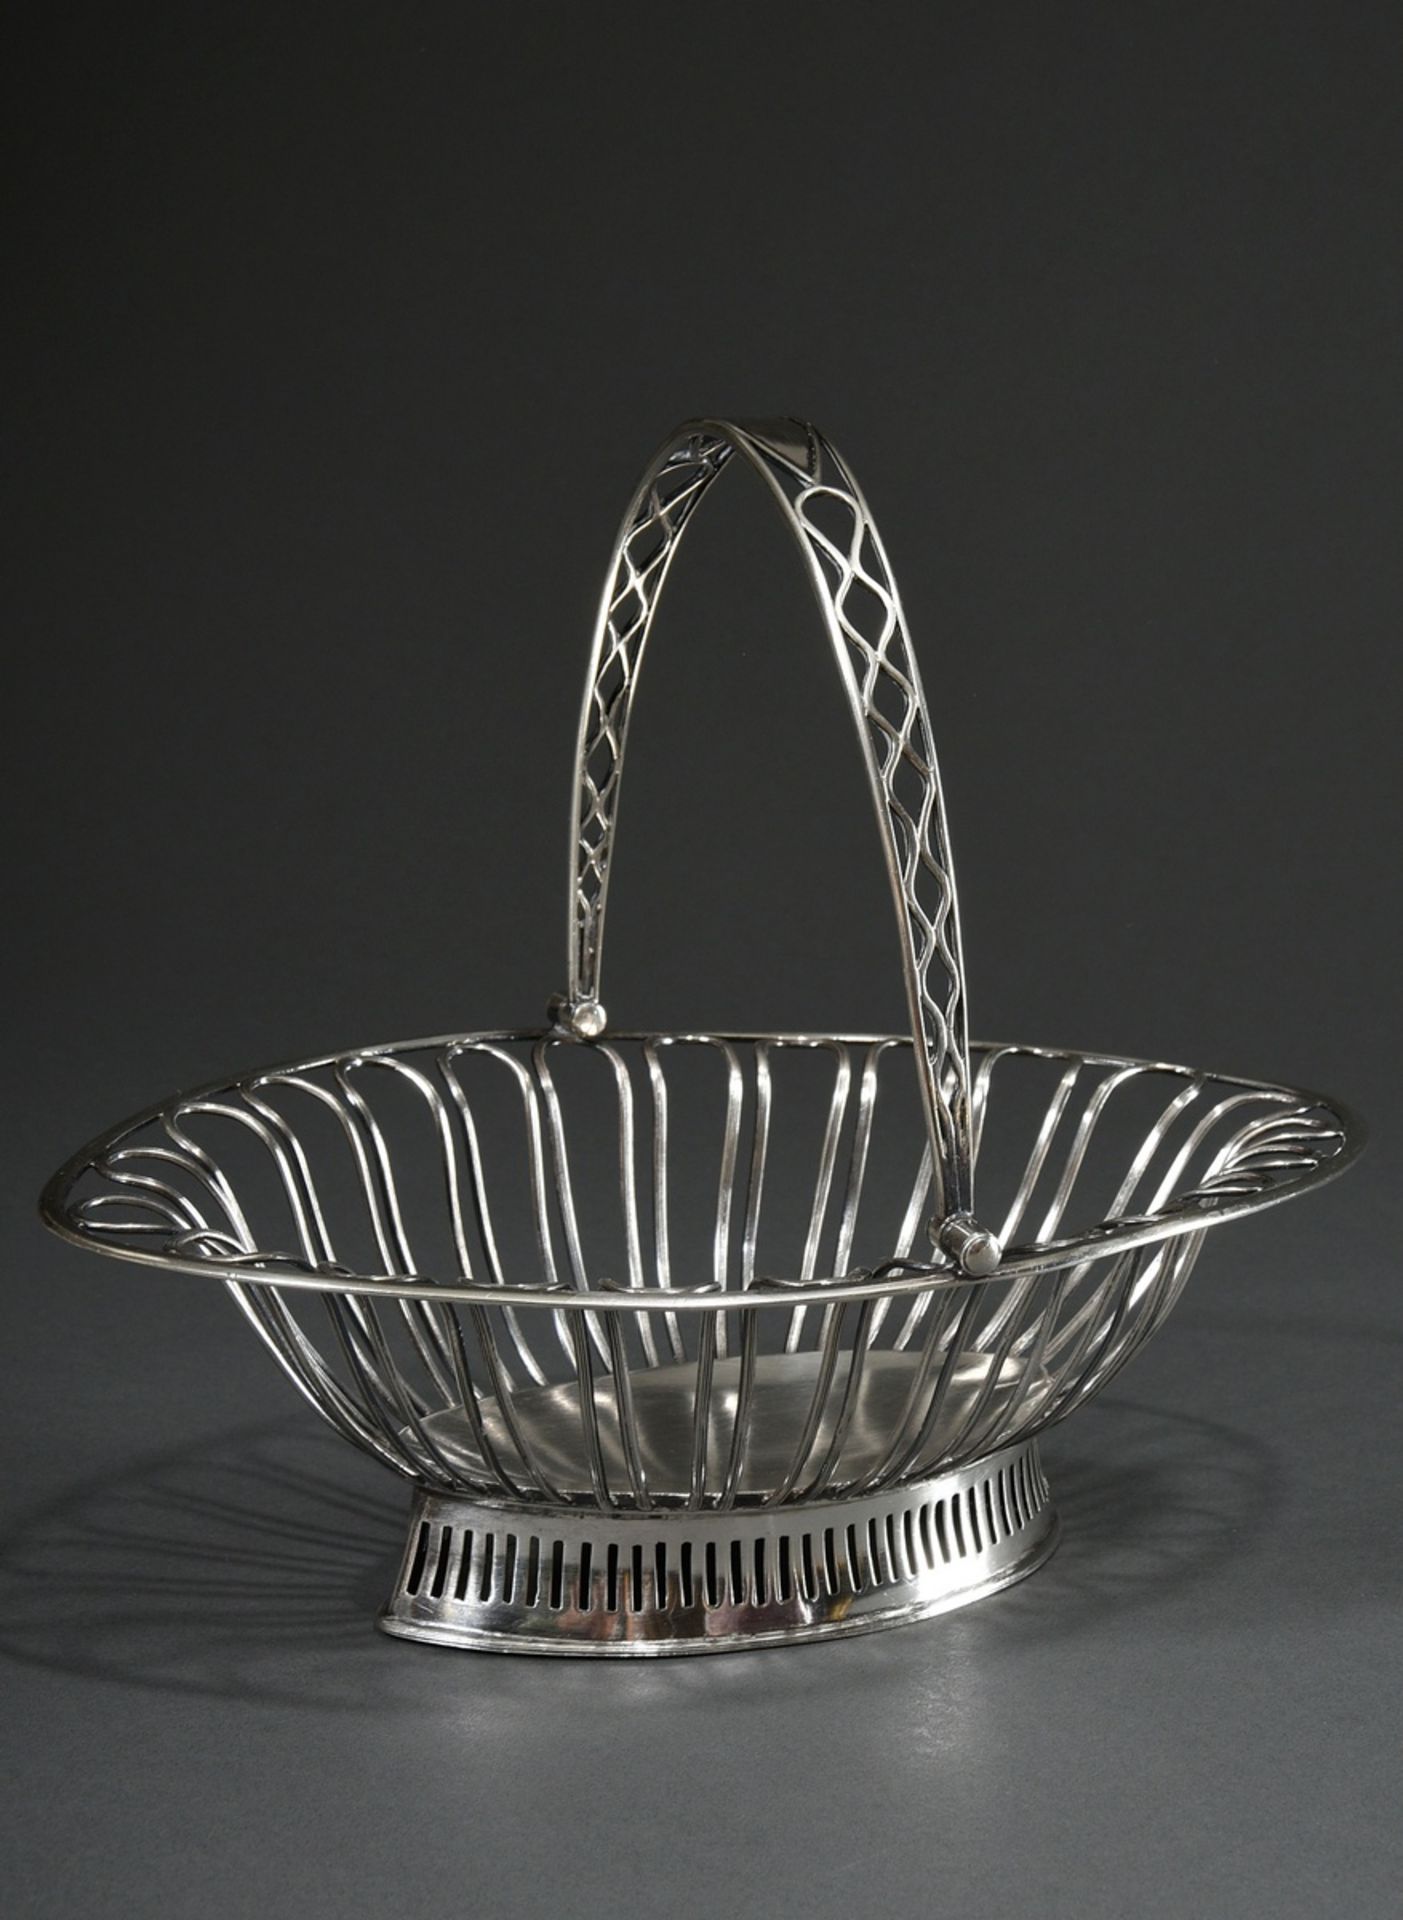 Classic silver basket with openwork hinged handle in simple façon, early 19th century, MM: B in dou